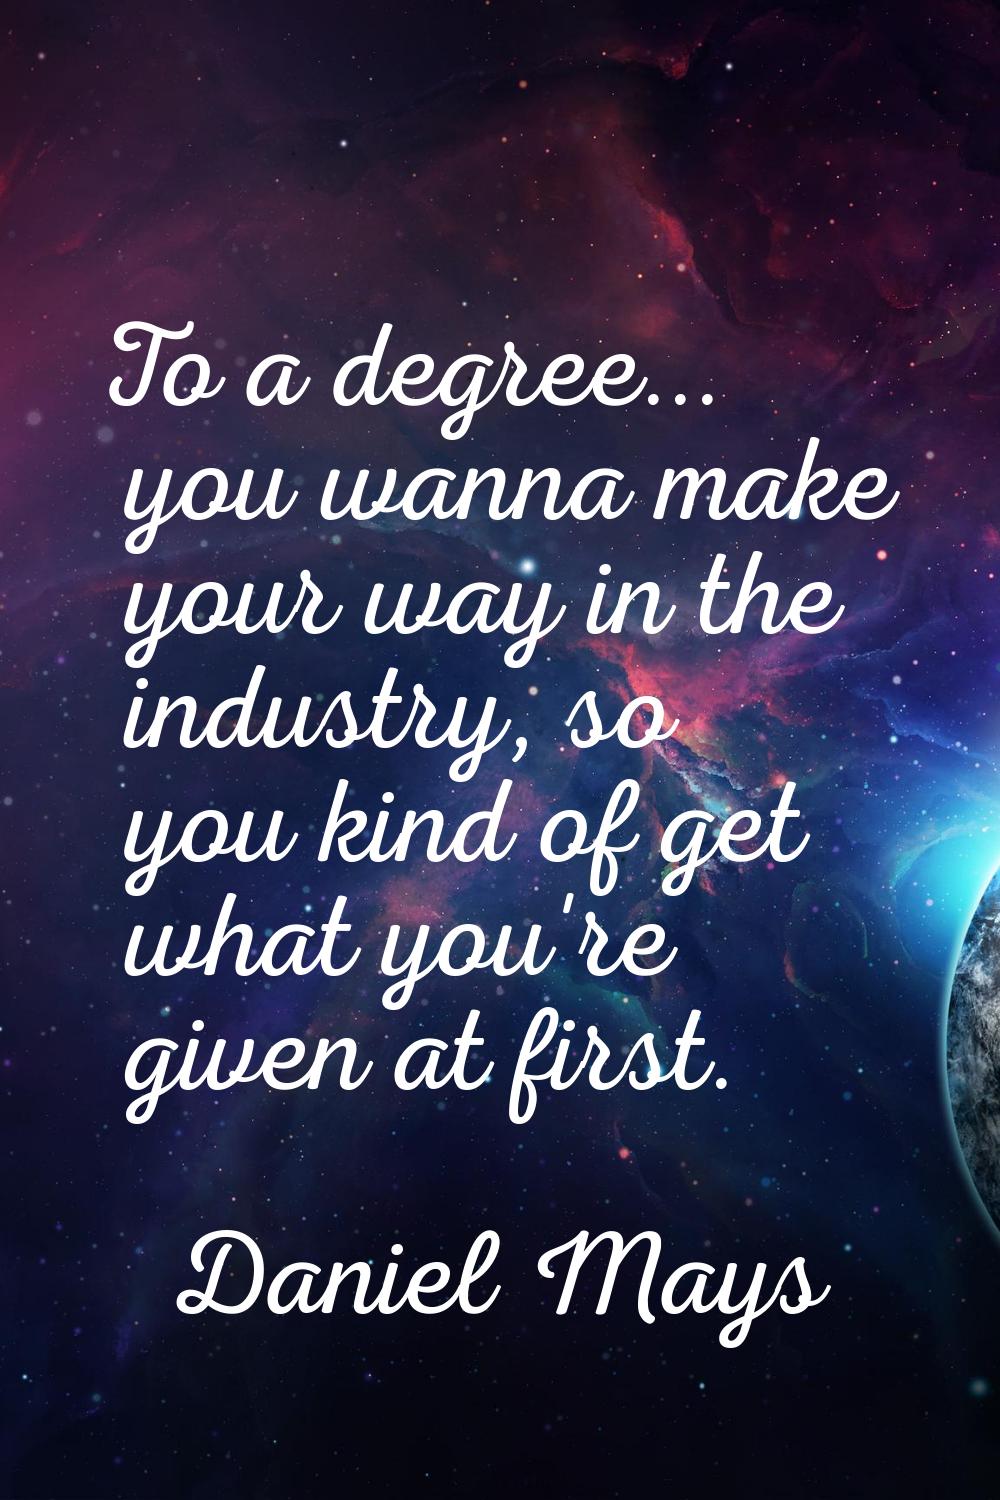 To a degree... you wanna make your way in the industry, so you kind of get what you're given at fir